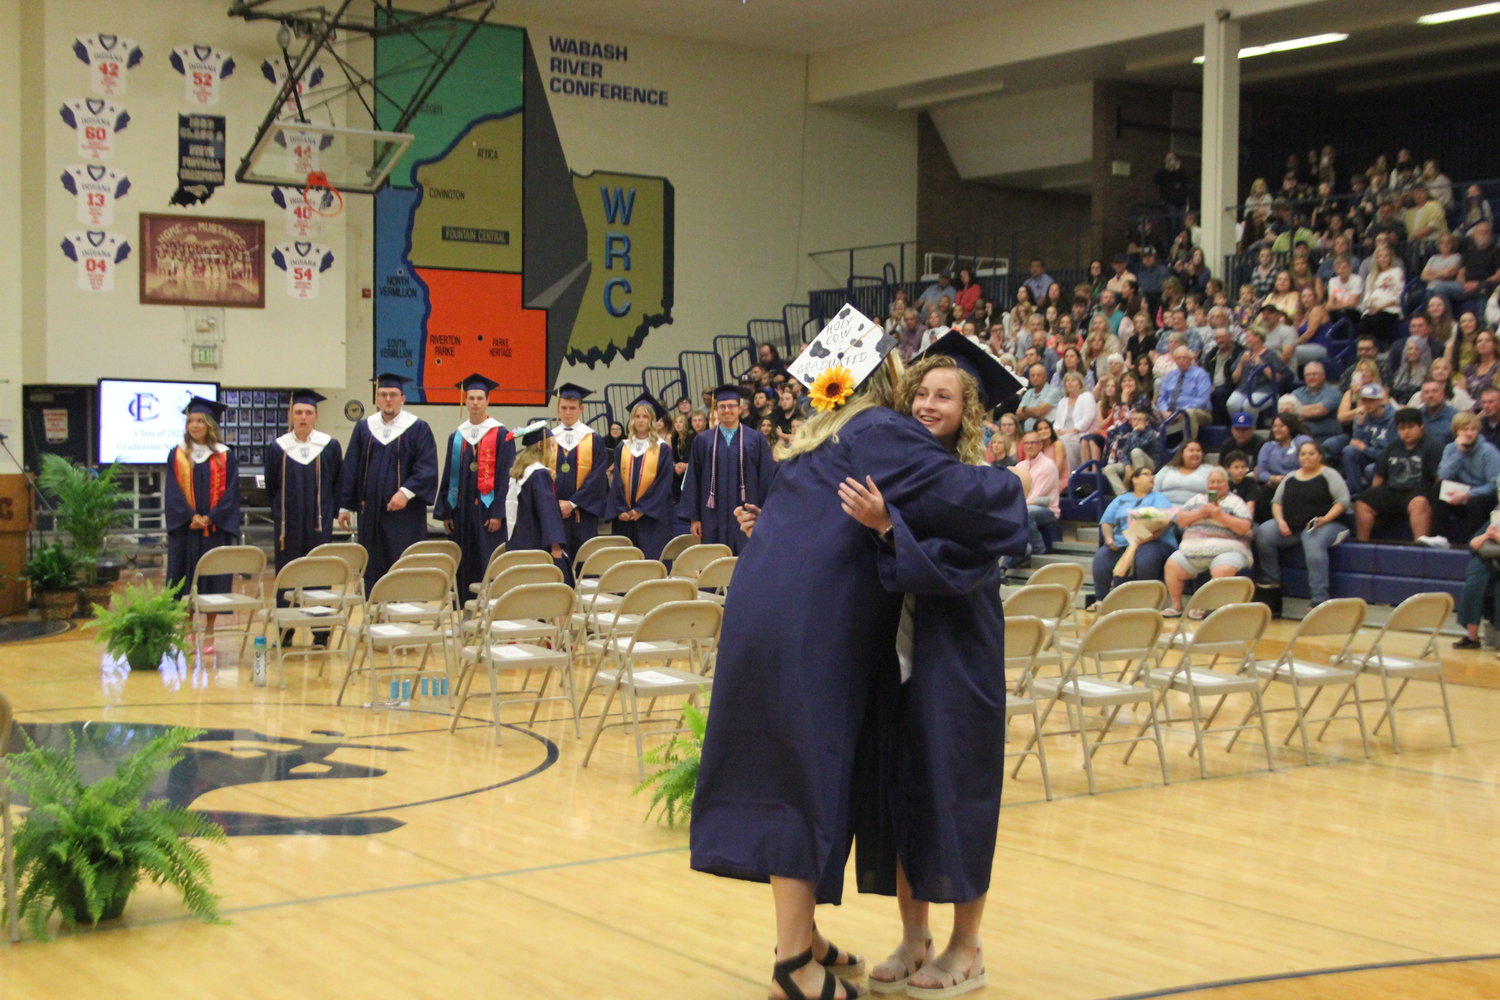 Cheyanne Thompson and Courtney Sims embrace before taking their seats.